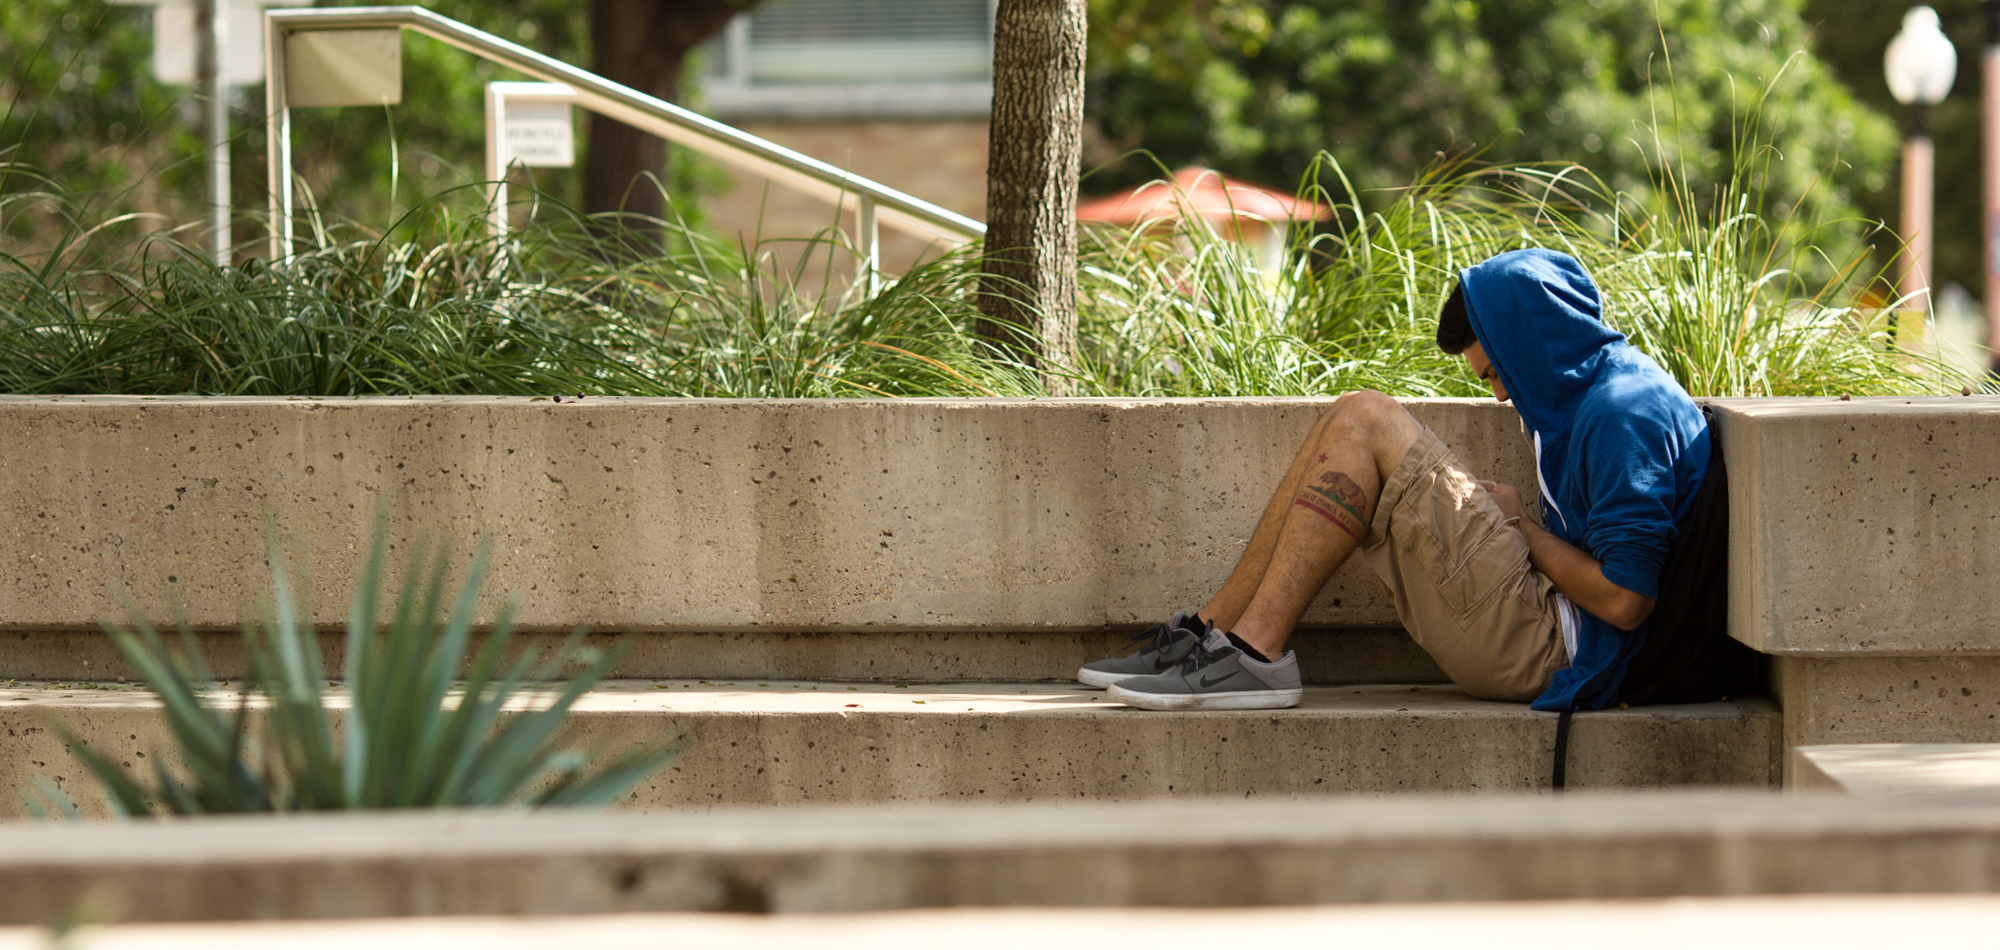 Young man in a blue sweatshirt and shorts huddles on a long concrete bench